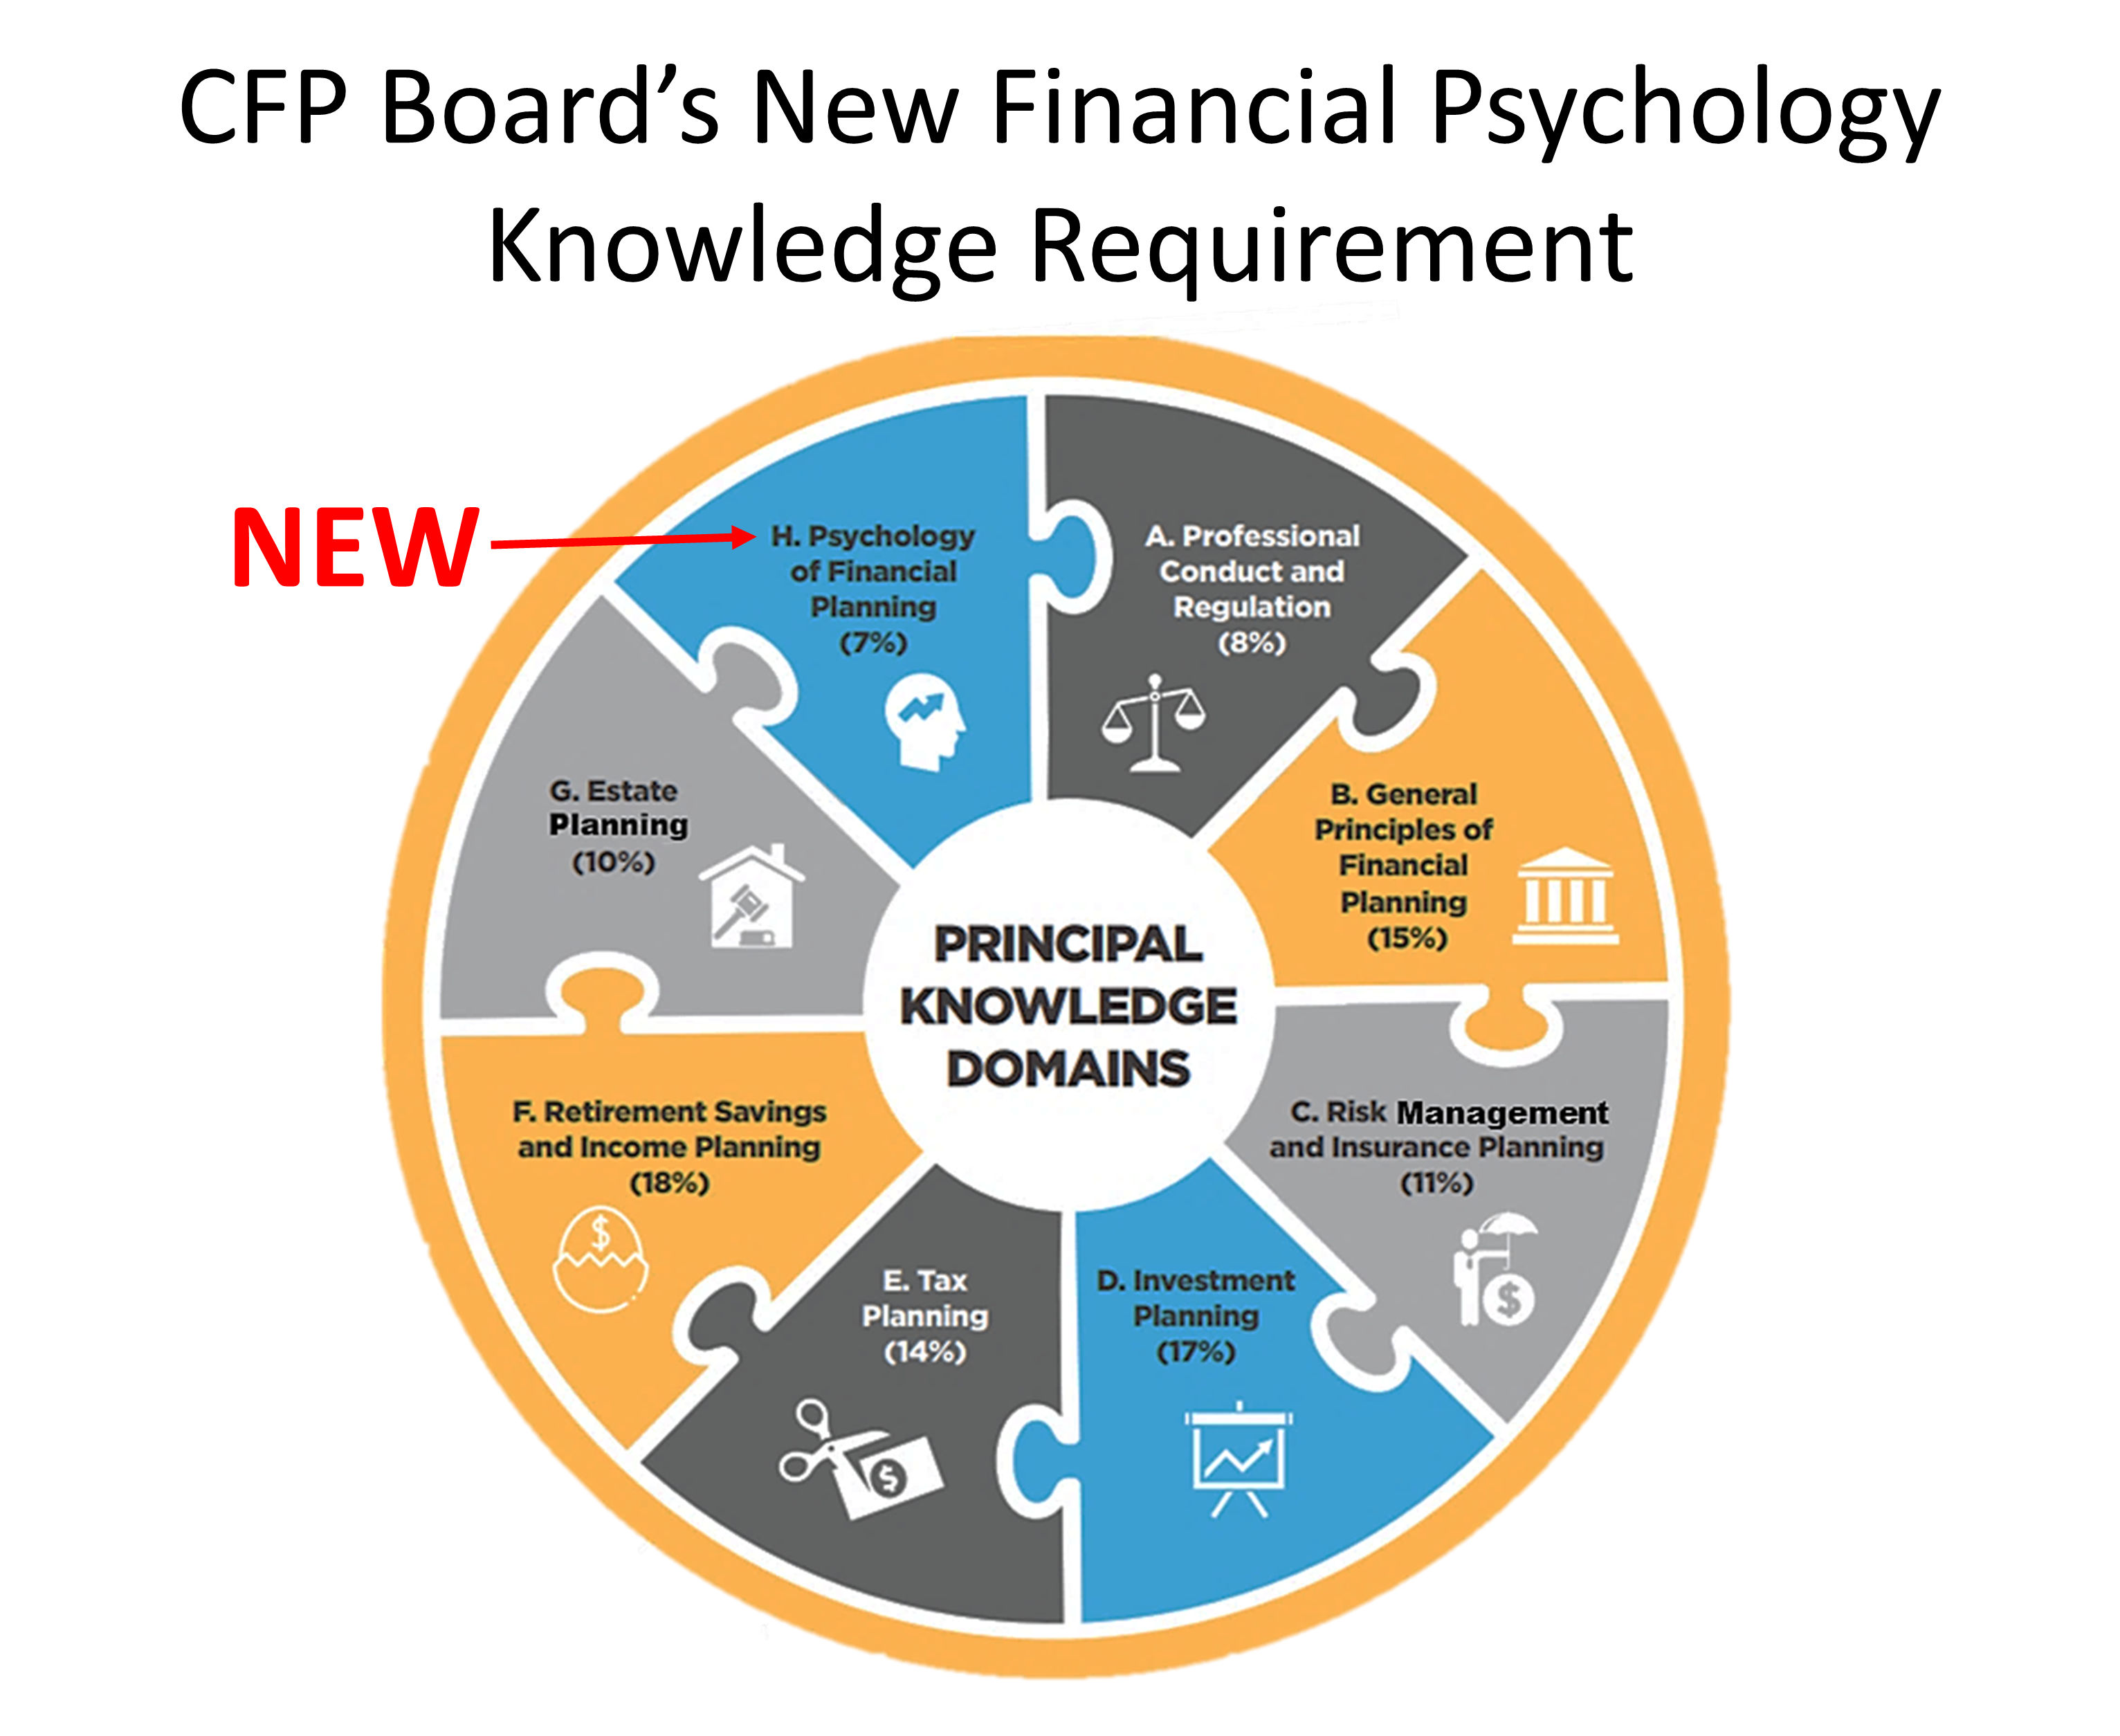 Financial Psychology Requirement Added by CFP Board 